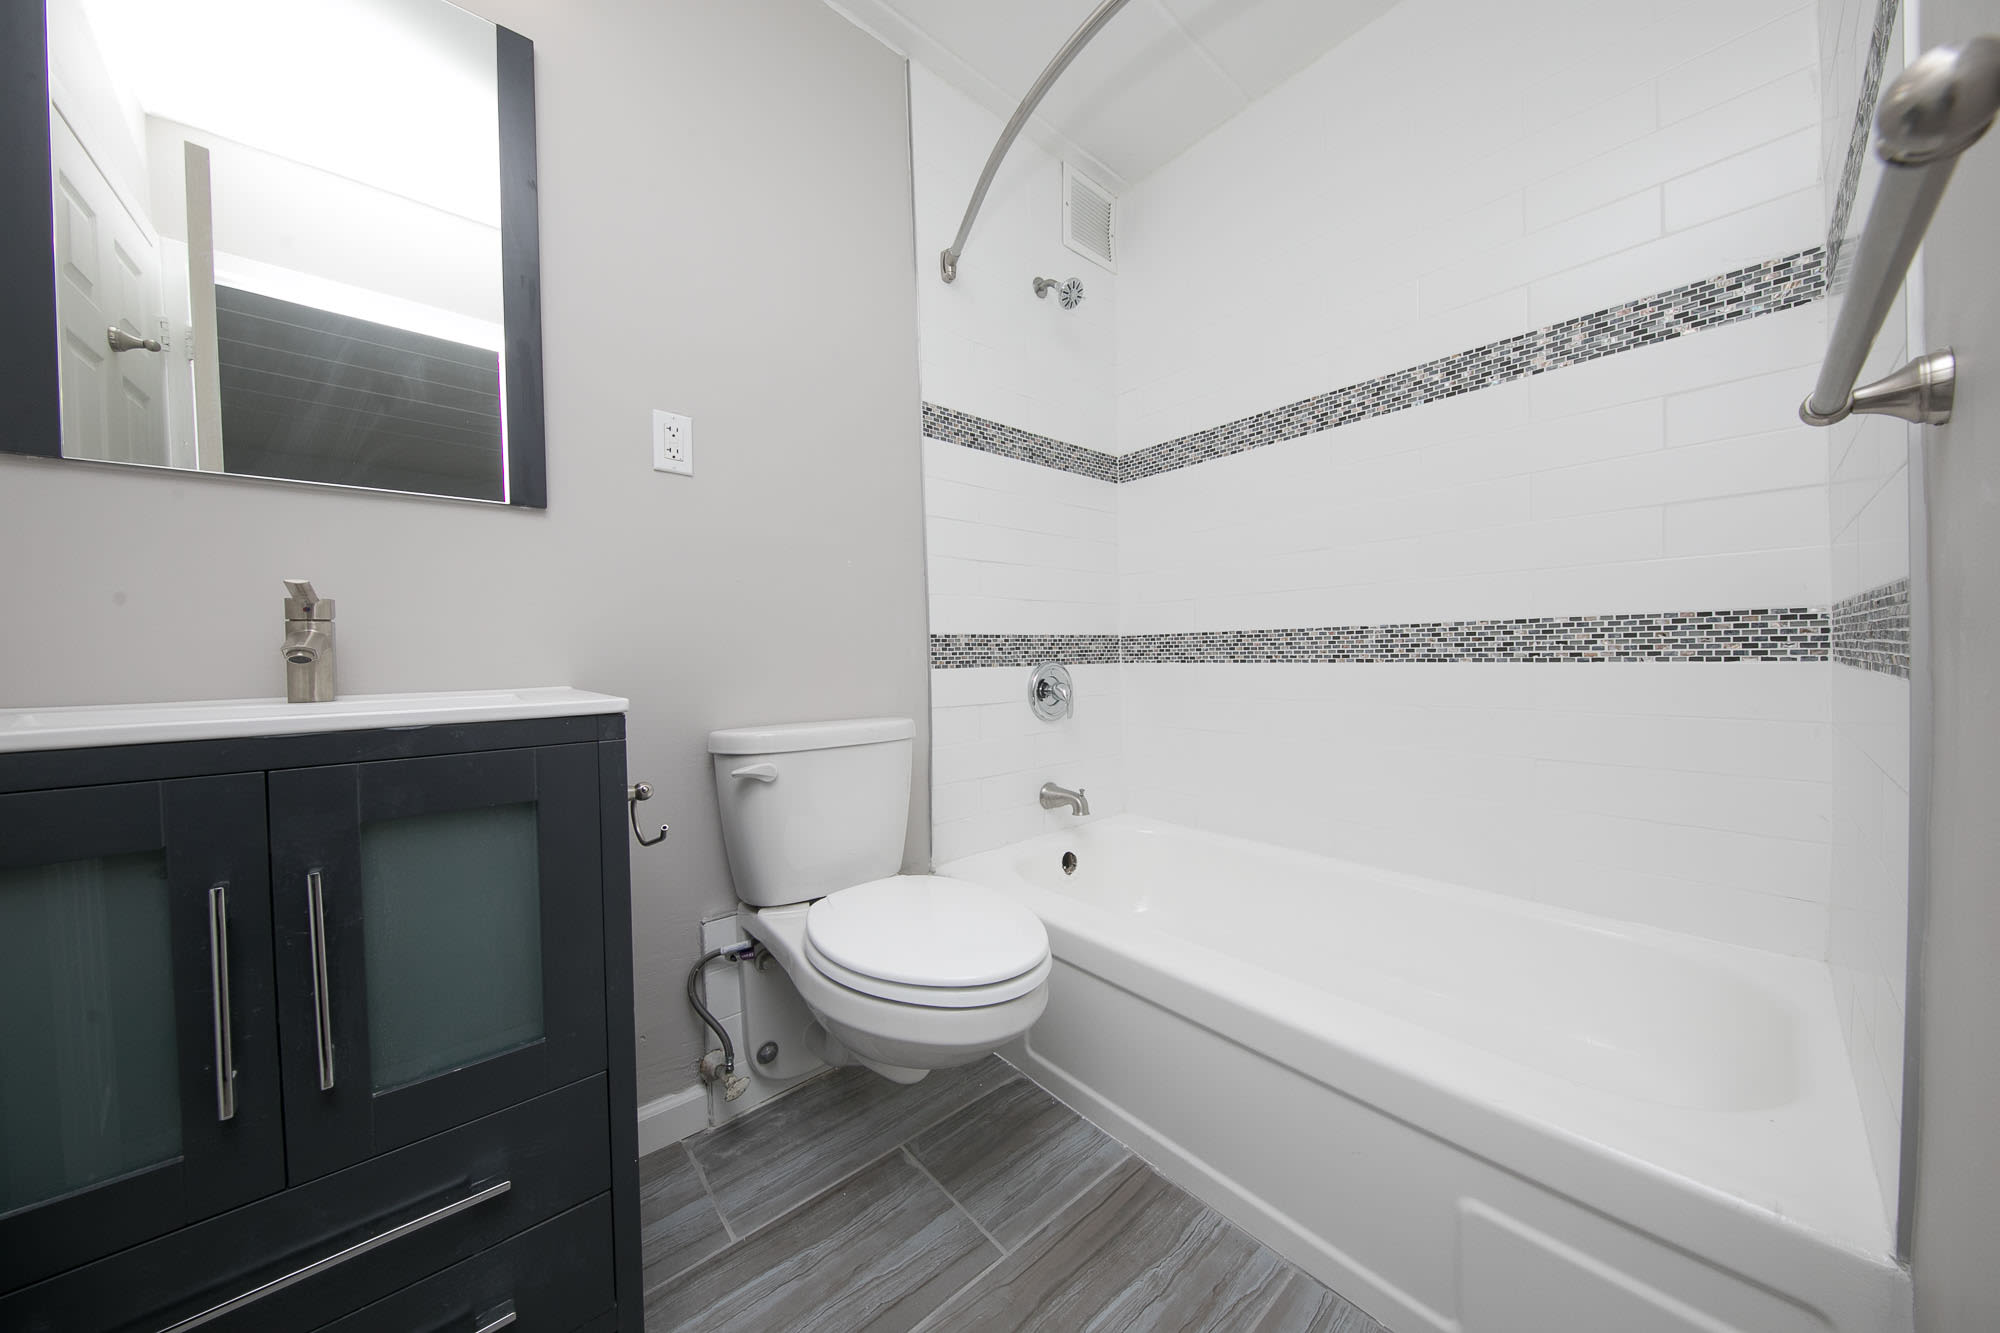 Tile shower and bathtub at Parc at Cherry Hill in Cherry Hill, New Jersey